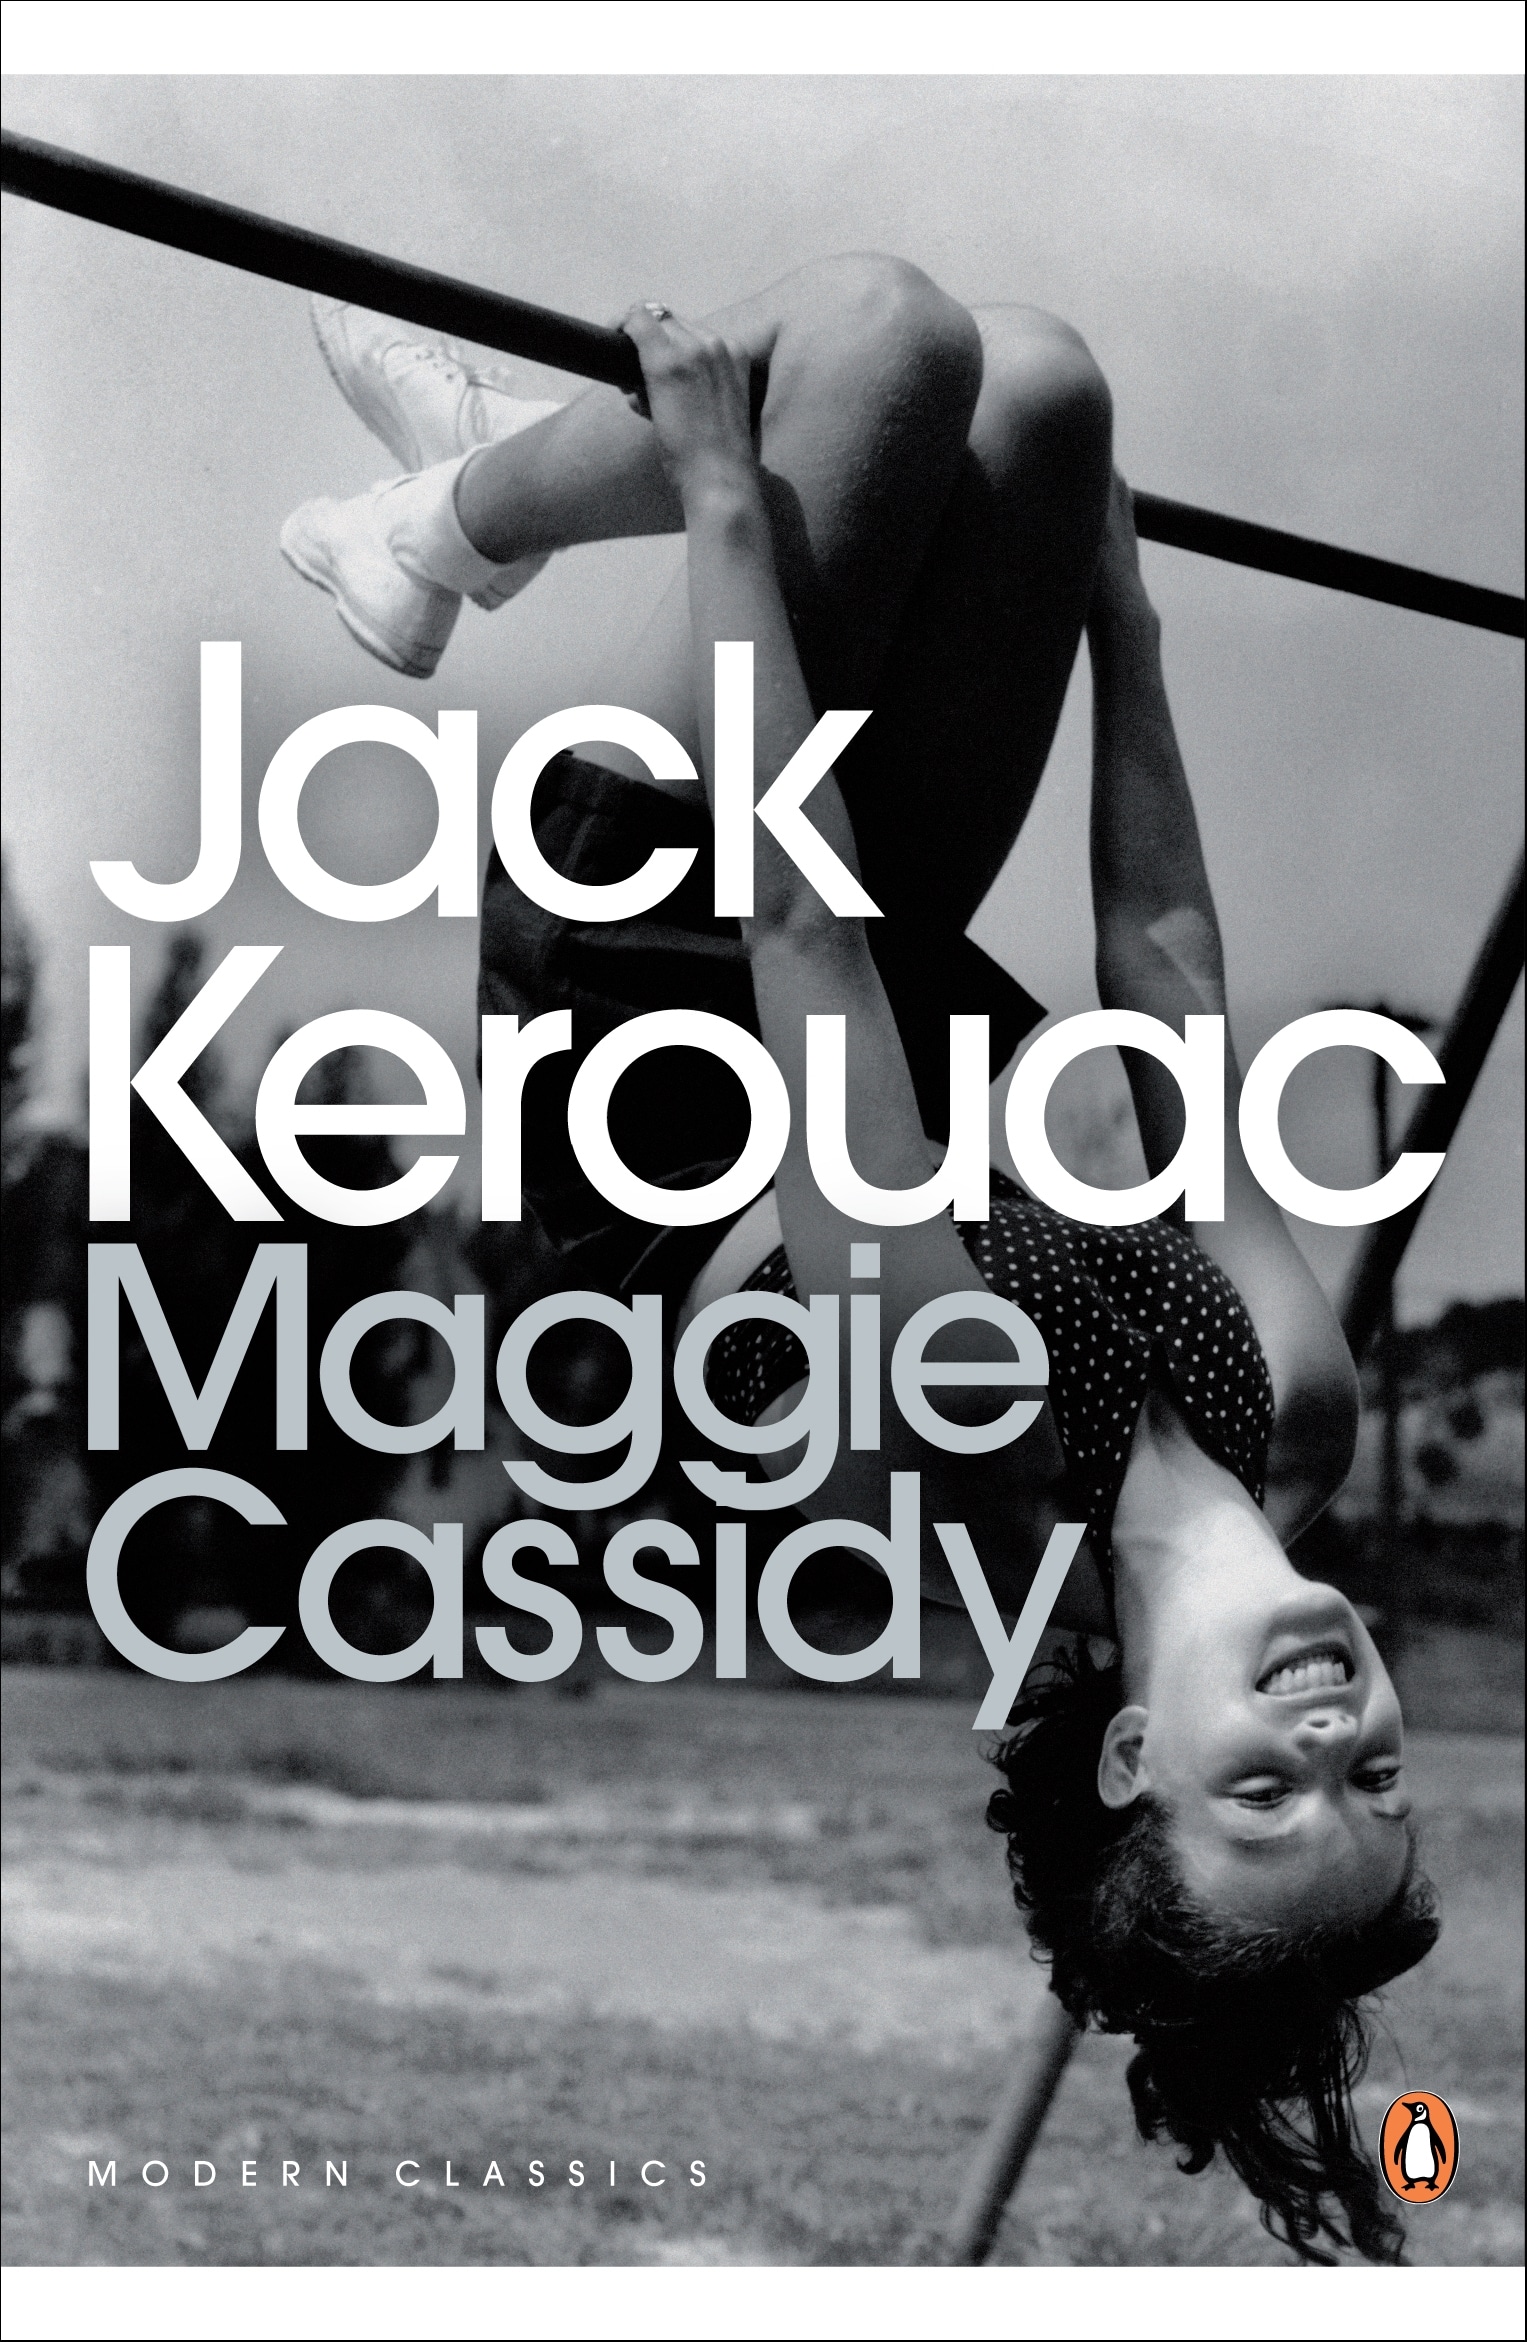 Book “Maggie Cassidy” by Jack Kerouac — February 5, 2009